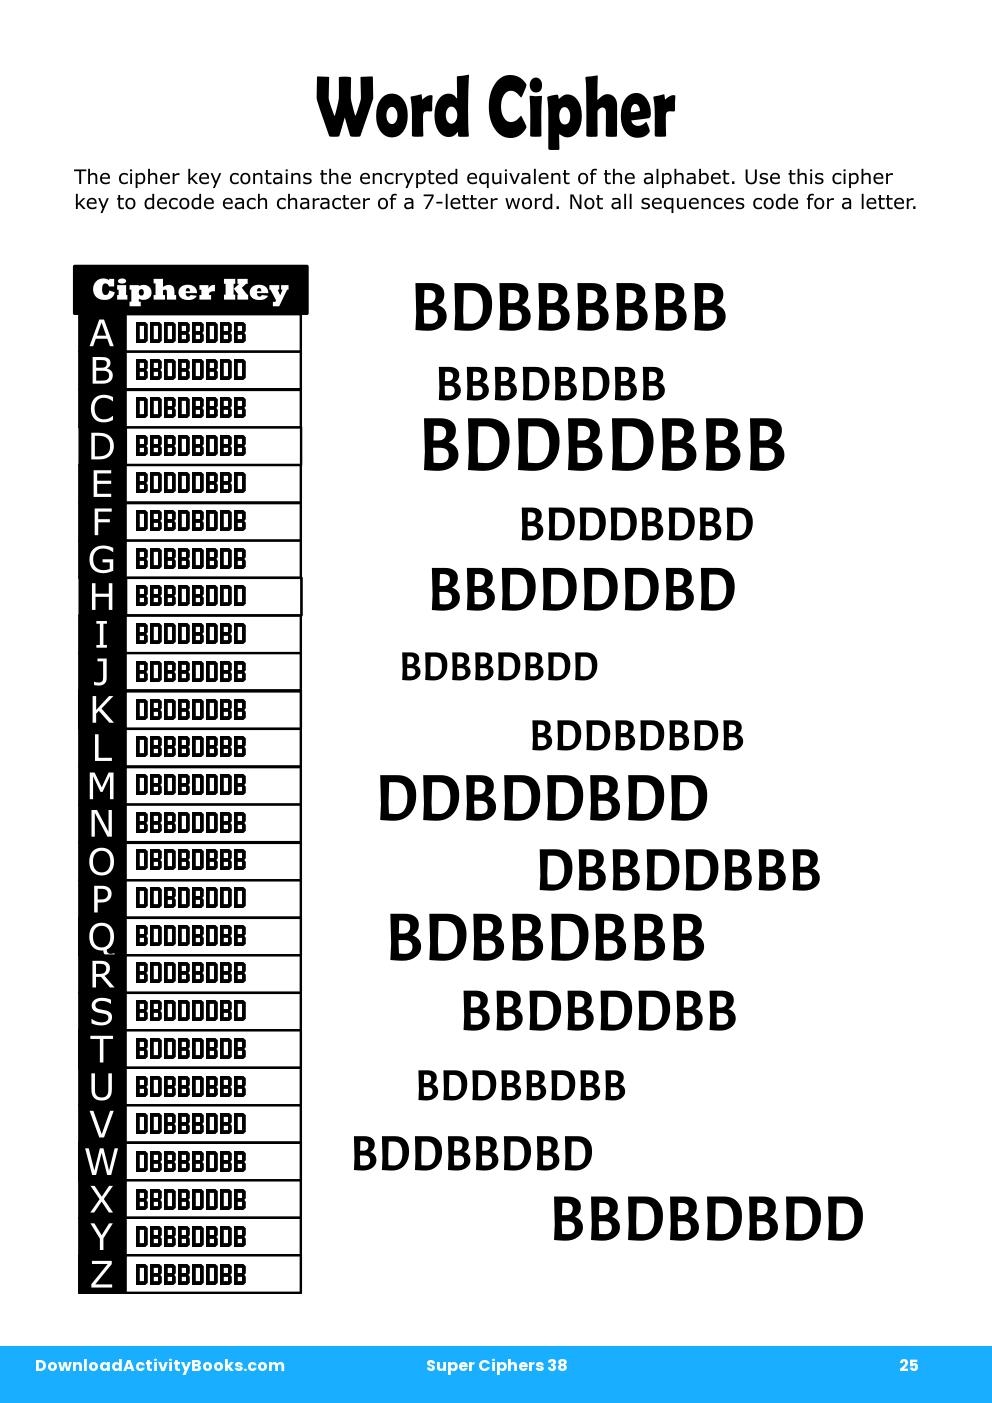 Word Cipher in Super Ciphers 38